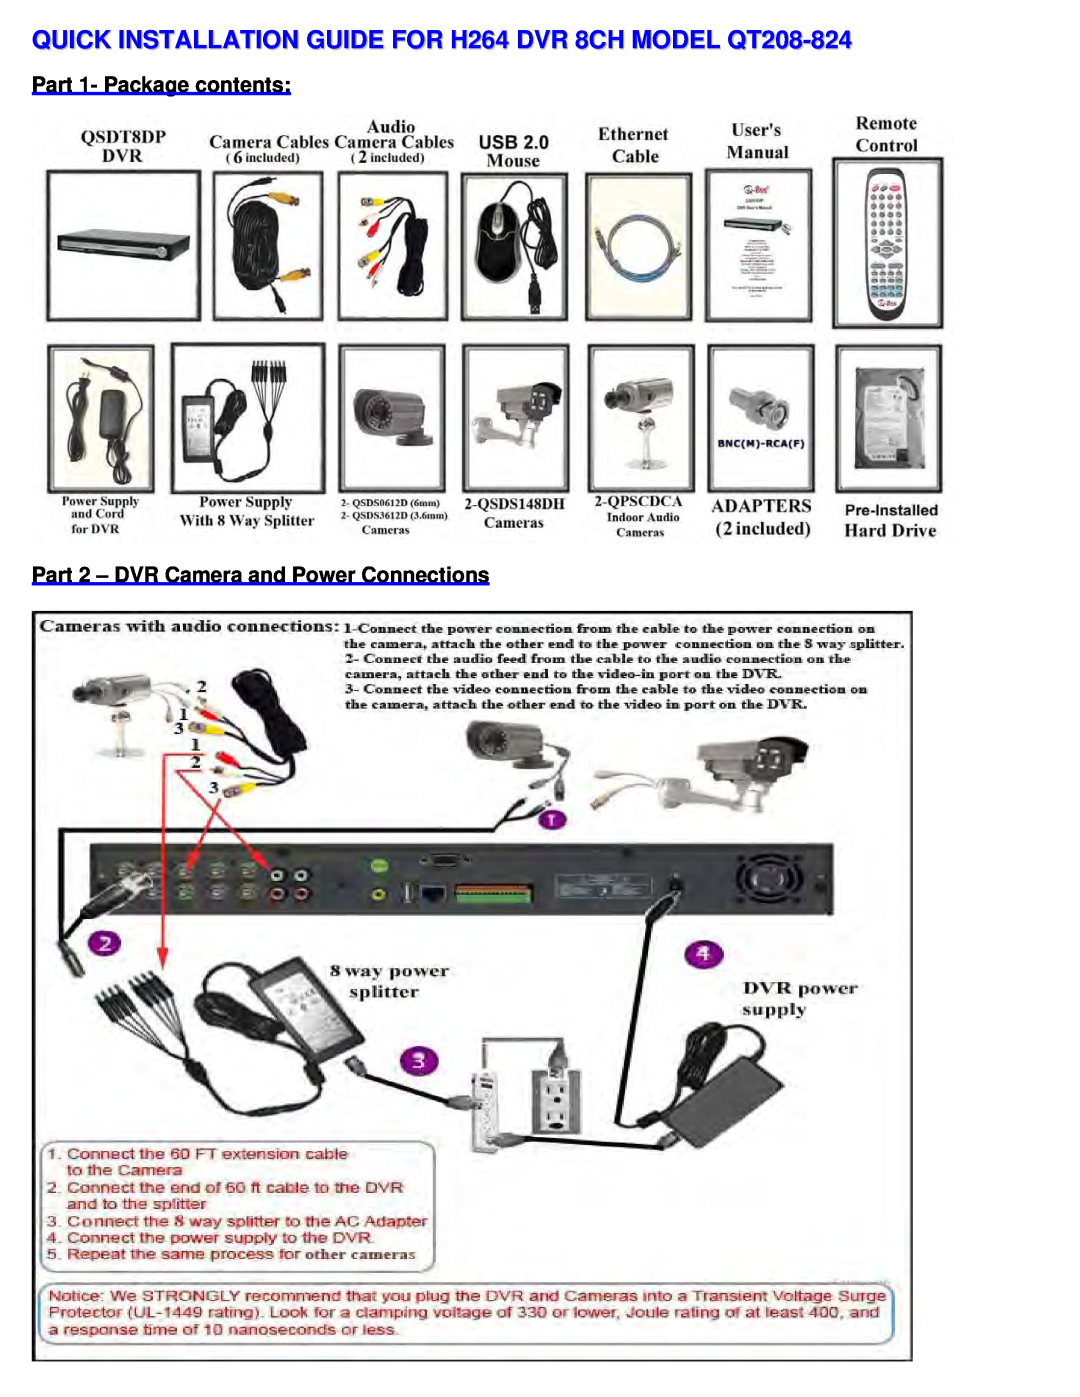 Q-See QT208-824 manual Part 1- Package contents, Part 2 - DVR Camera and Power Connections 